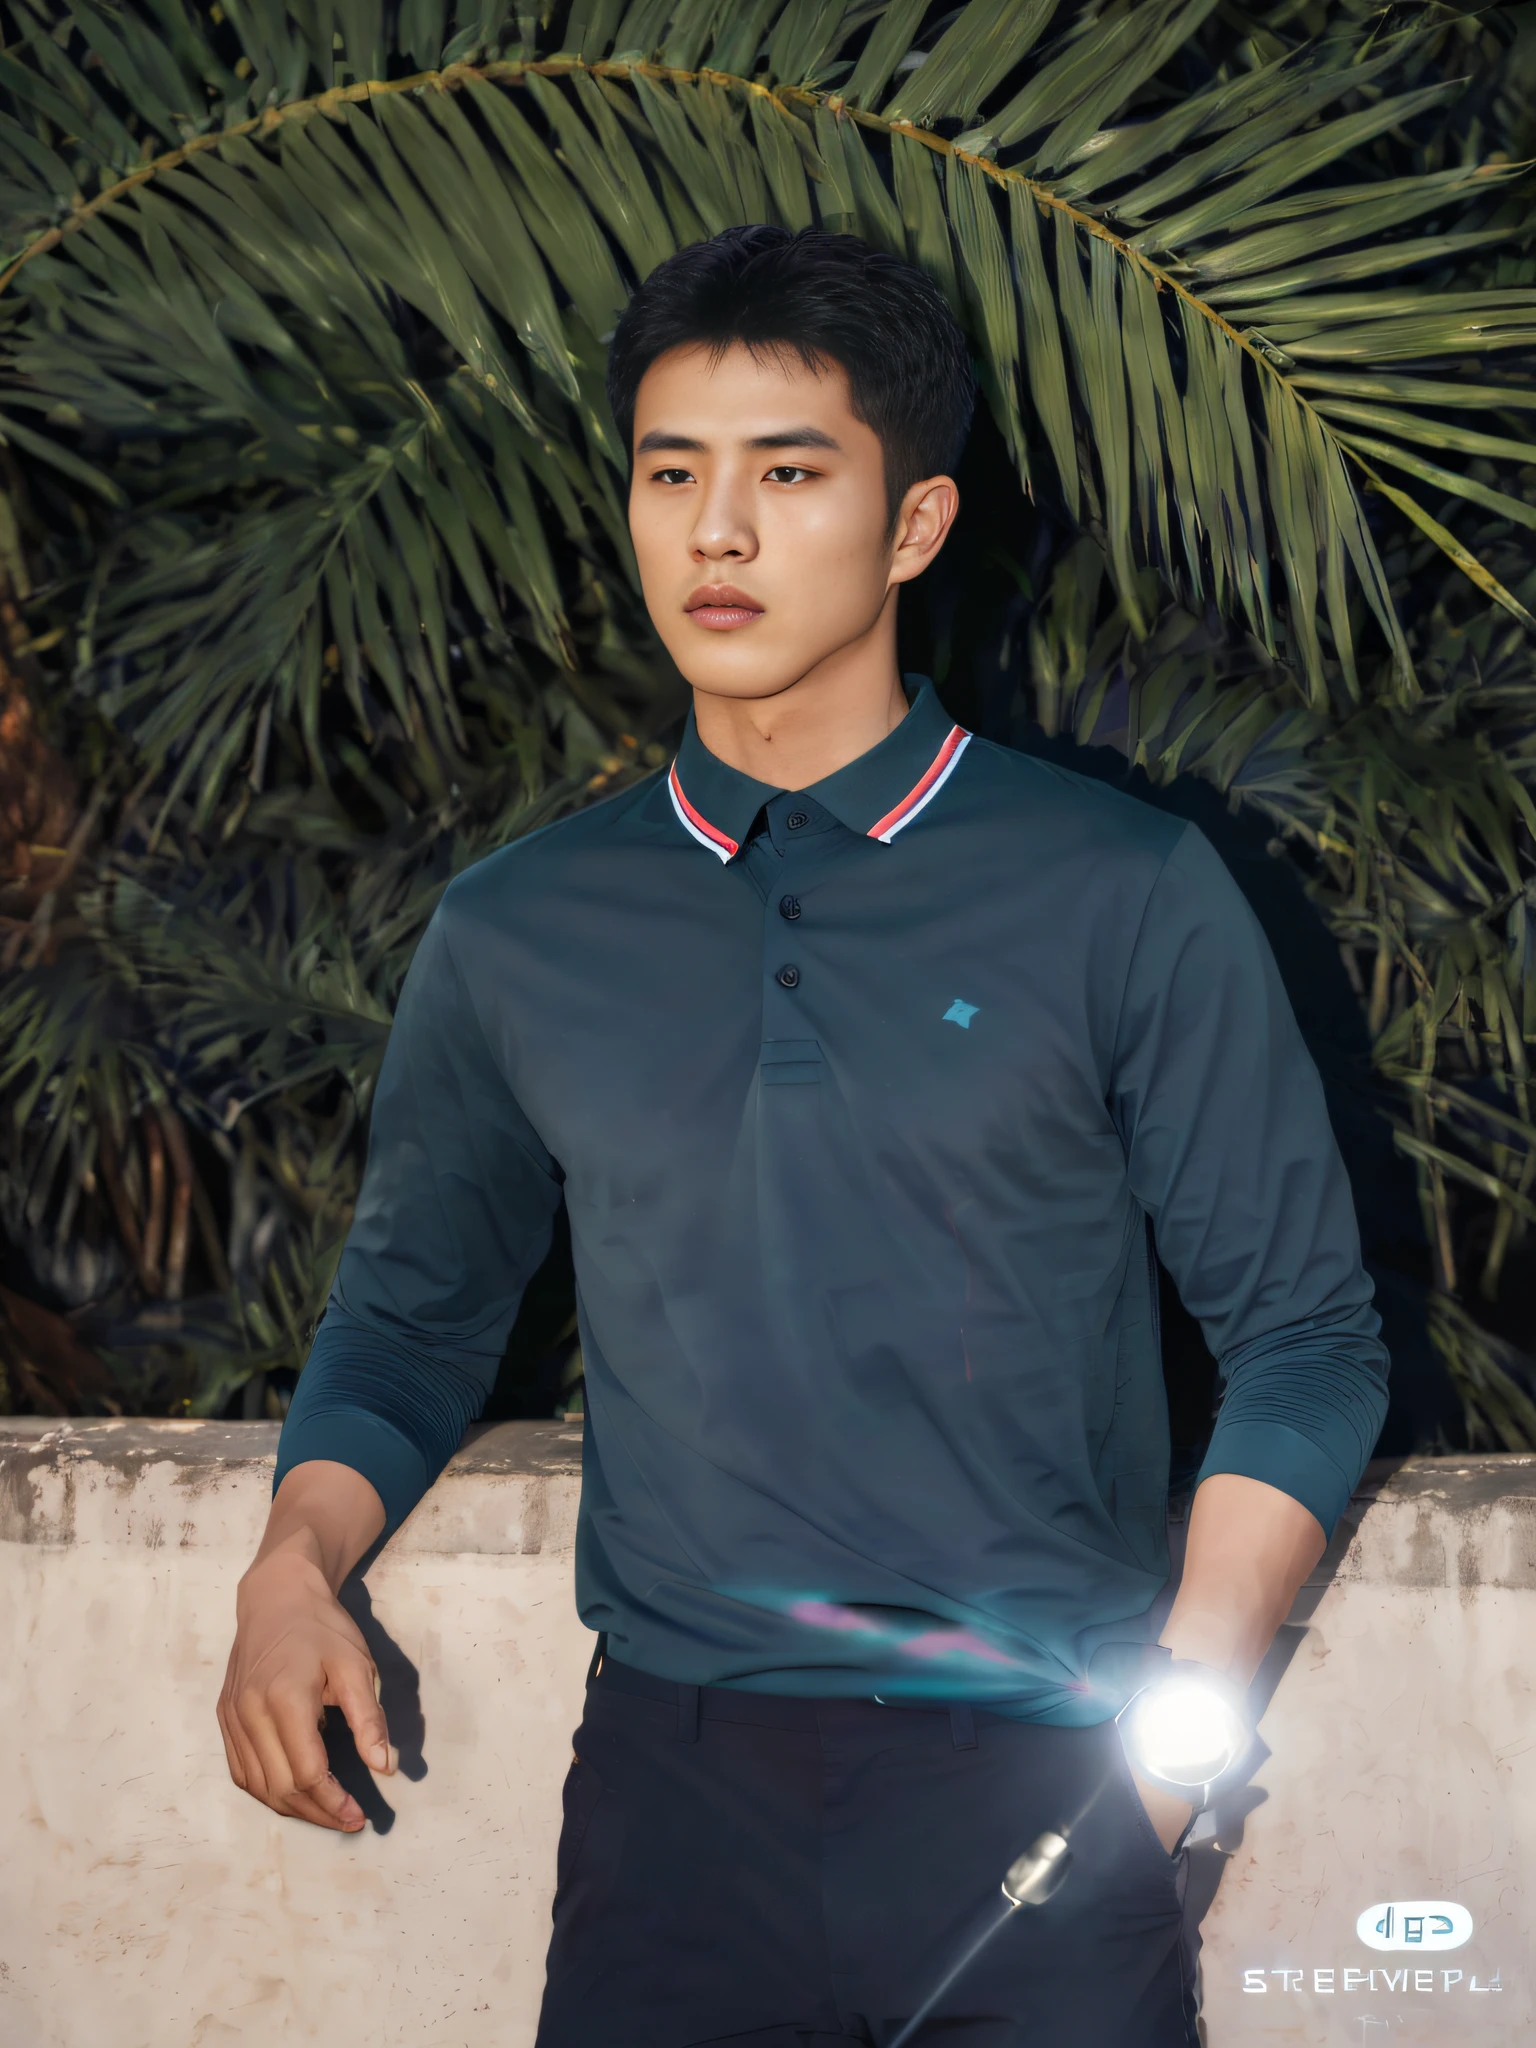 The Alafed man in a blue shirt and black pants stands next to a palm tree, in a dark teal polo shirt, in a dark green polo shirt, Inspired by Zhang Han, Wearing a polo shirt, ( ( Dark green, Li Zixin, inspired by Wang Zhenpeng, inspired by Liu Jun, wearing a dark blue polo shirt, yanjun cheng, Kingsoft retina screen，Vertical painting shadows，Perspectiva subjetiva，atmospheric distance sense，hyper HD，Textured skin，HighestQuali，high detal，The eyes are bright and alert，Ray traching，Multiple monochromes，Cinematic lighting effects，Star temperament